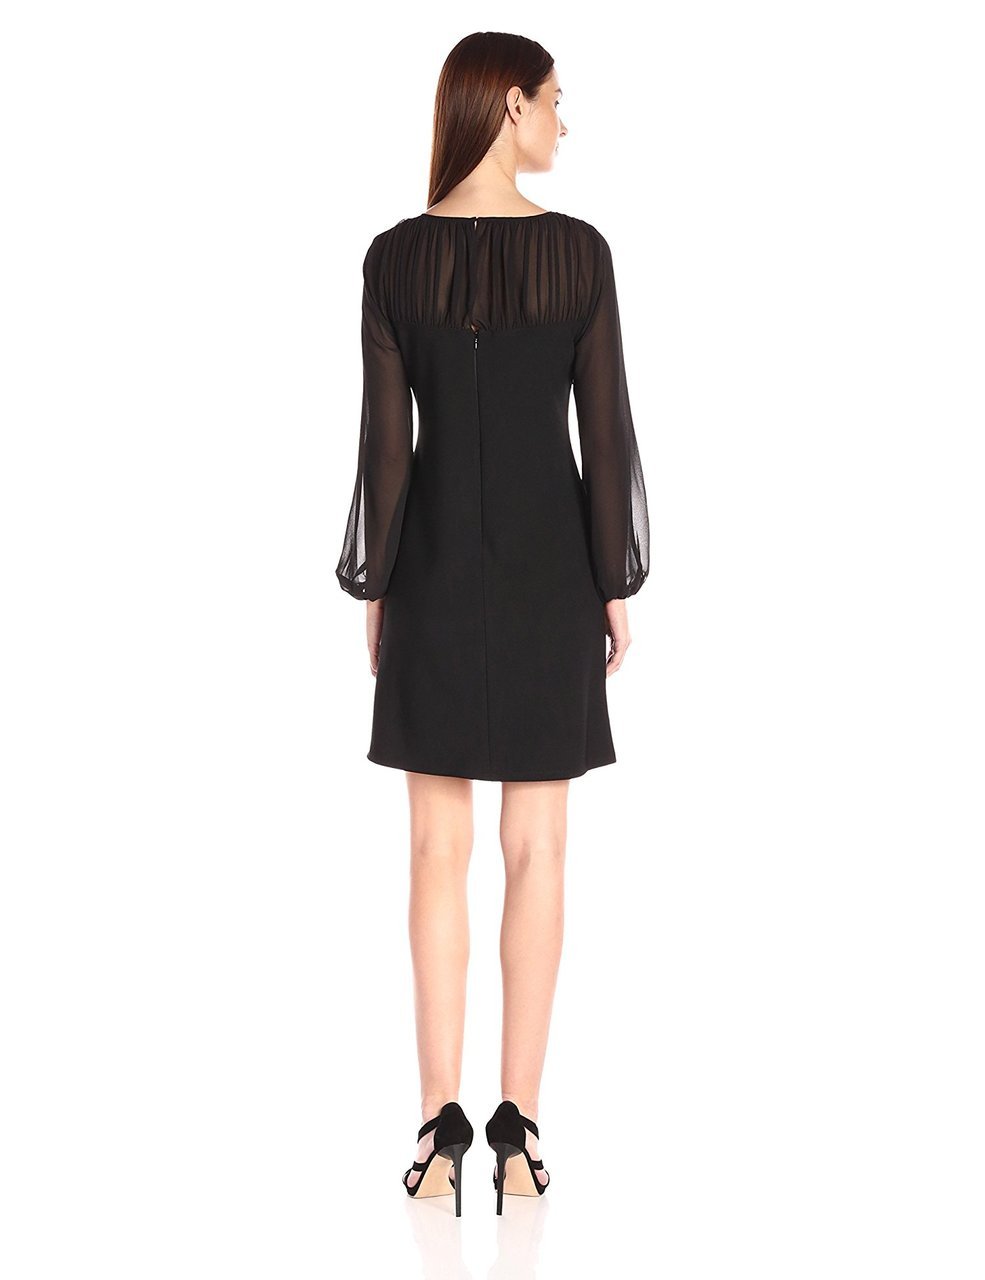 Taylor - Chiffon and Jersey Long Sleeve Dress 5915M in Black